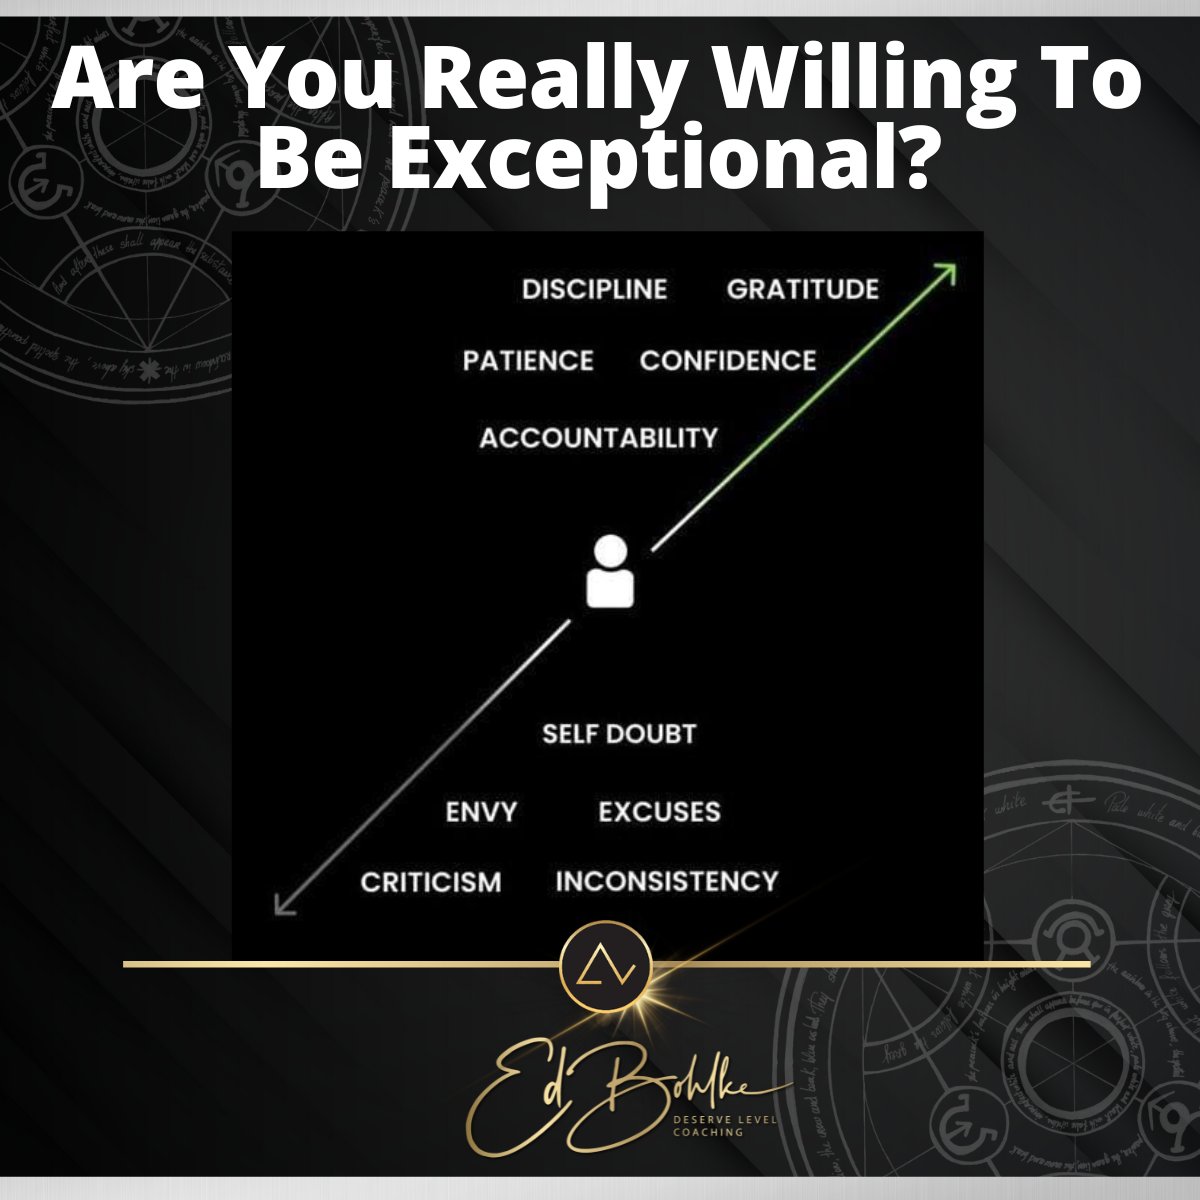 How LEGENDARY do you want to be?

.
.
.
.
.
.

I do not own the image in this post. All credit to the respective author. 

#DerveLevel #PerformanceCoach #Coaching #FullPotential #ComfortZone #Action #Plan #SelfRealization #SelfImprovement #SelfDiscipline #Goals #Success